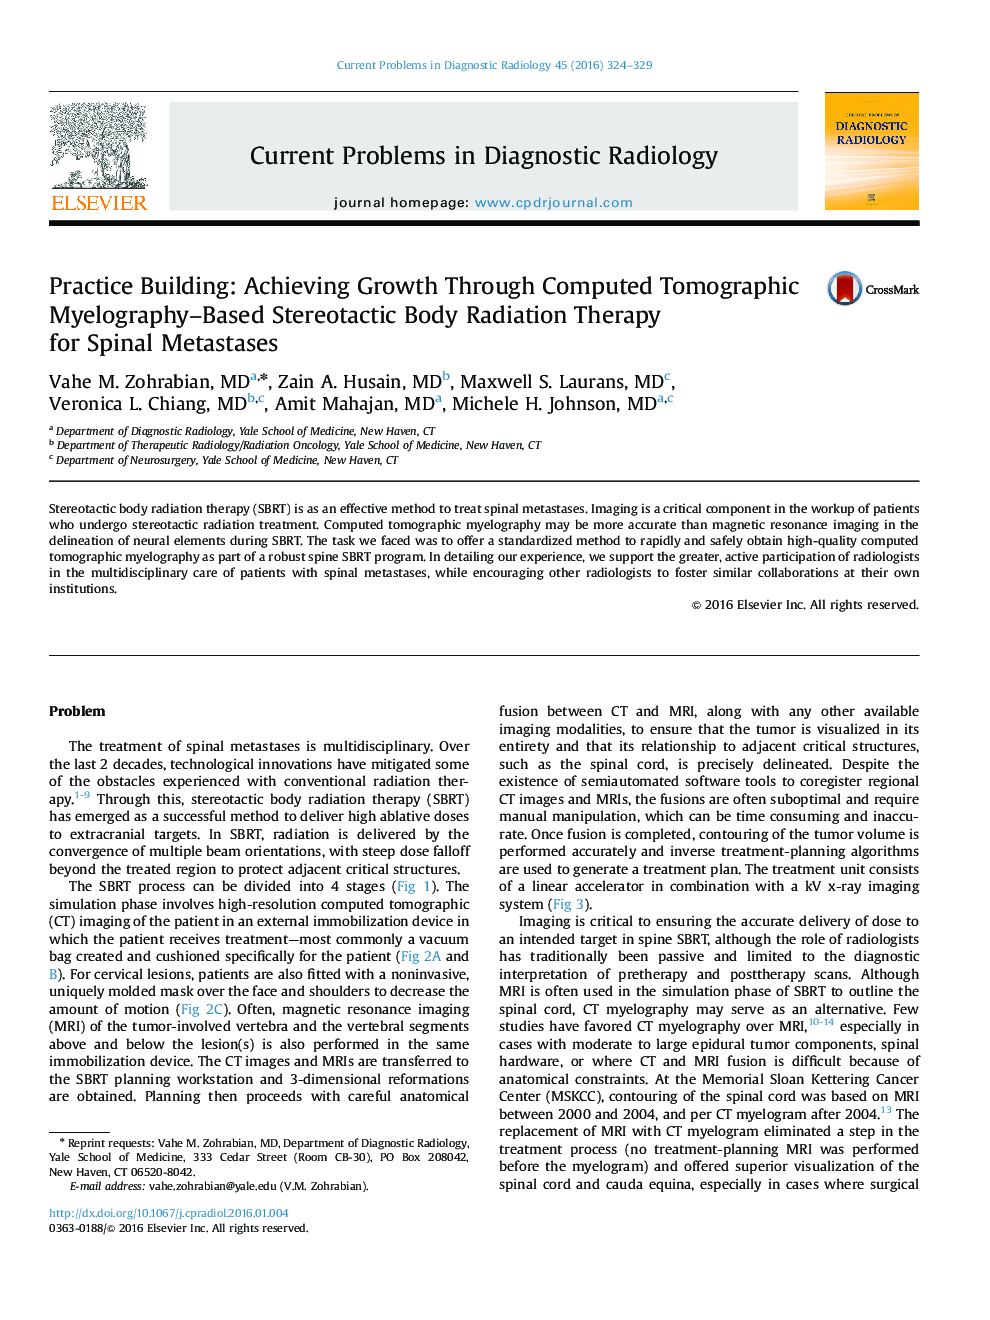 Practice Building: Achieving Growth Through Computed Tomographic Myelography–Based Stereotactic Body Radiation Therapy for Spinal Metastases